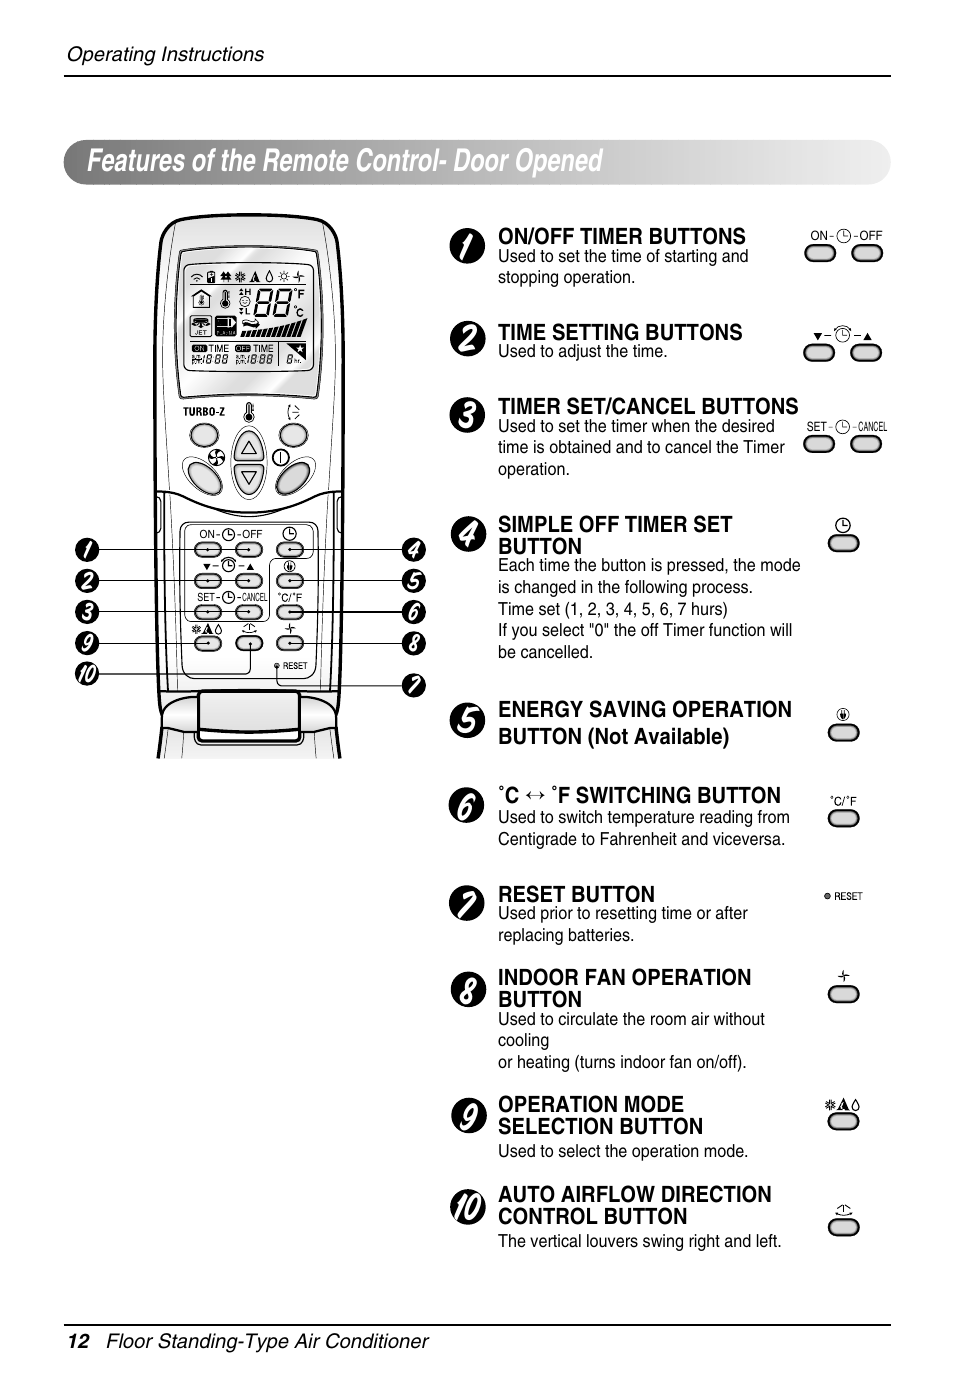 Features of the remote control- door opened | LG Air Conditioner User Manual  | Page 12 / 28